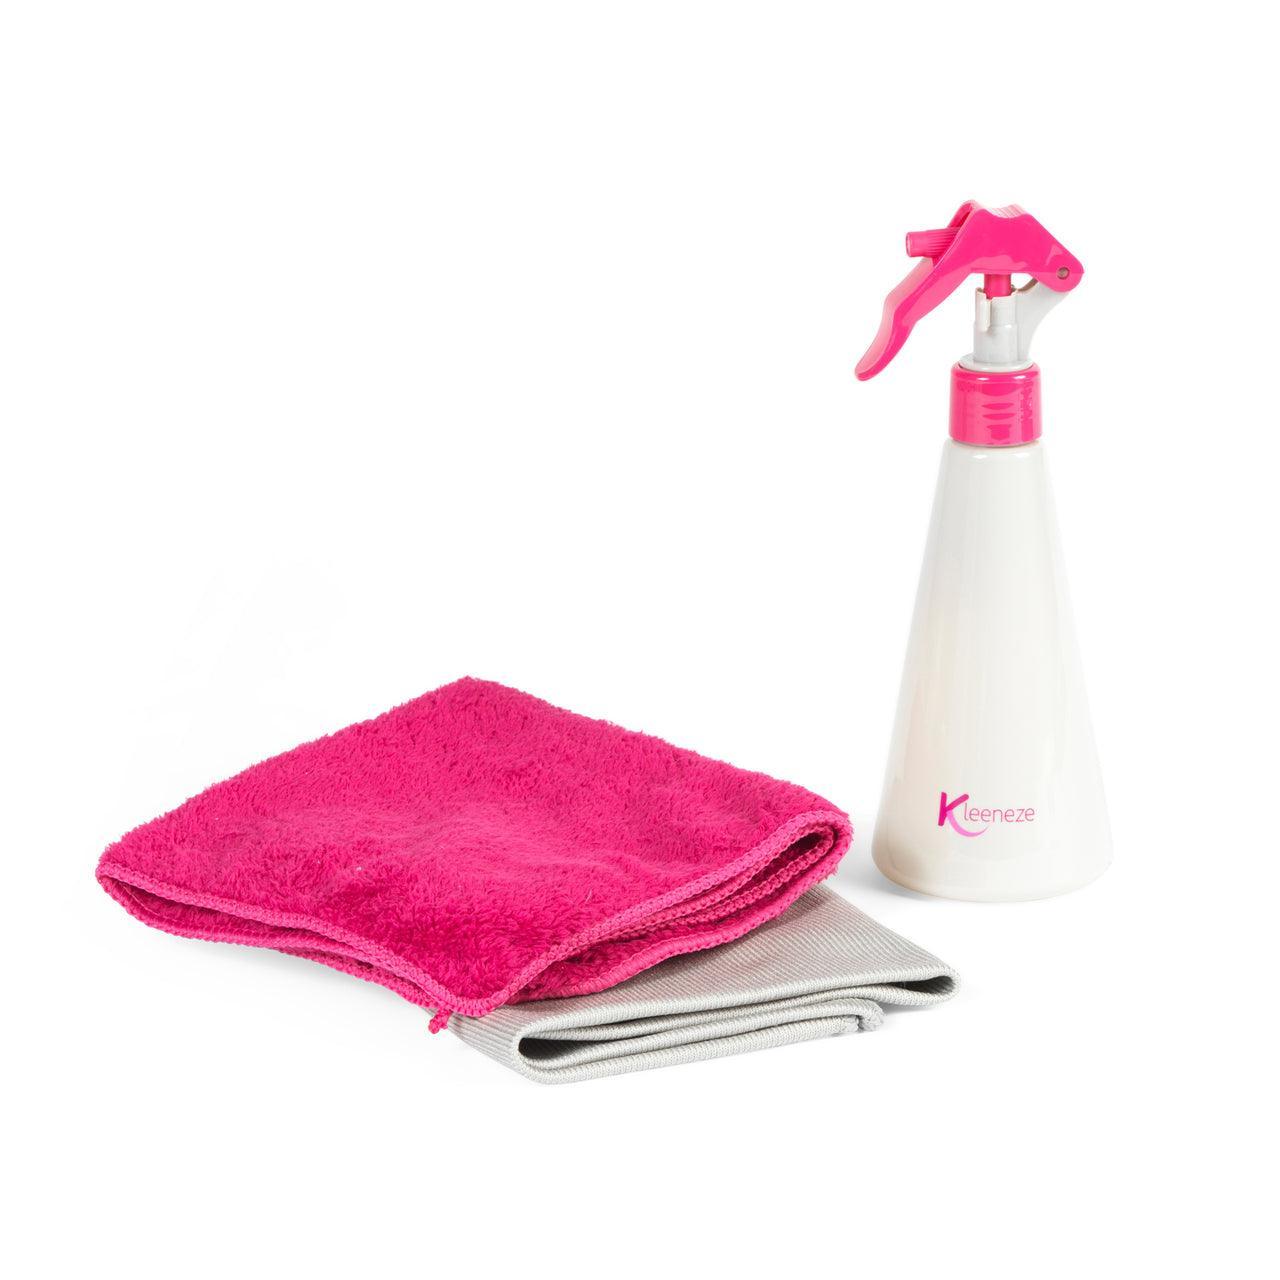 Kleeneze Spray Bottle With Two Deluxe Cloths - Choice Stores